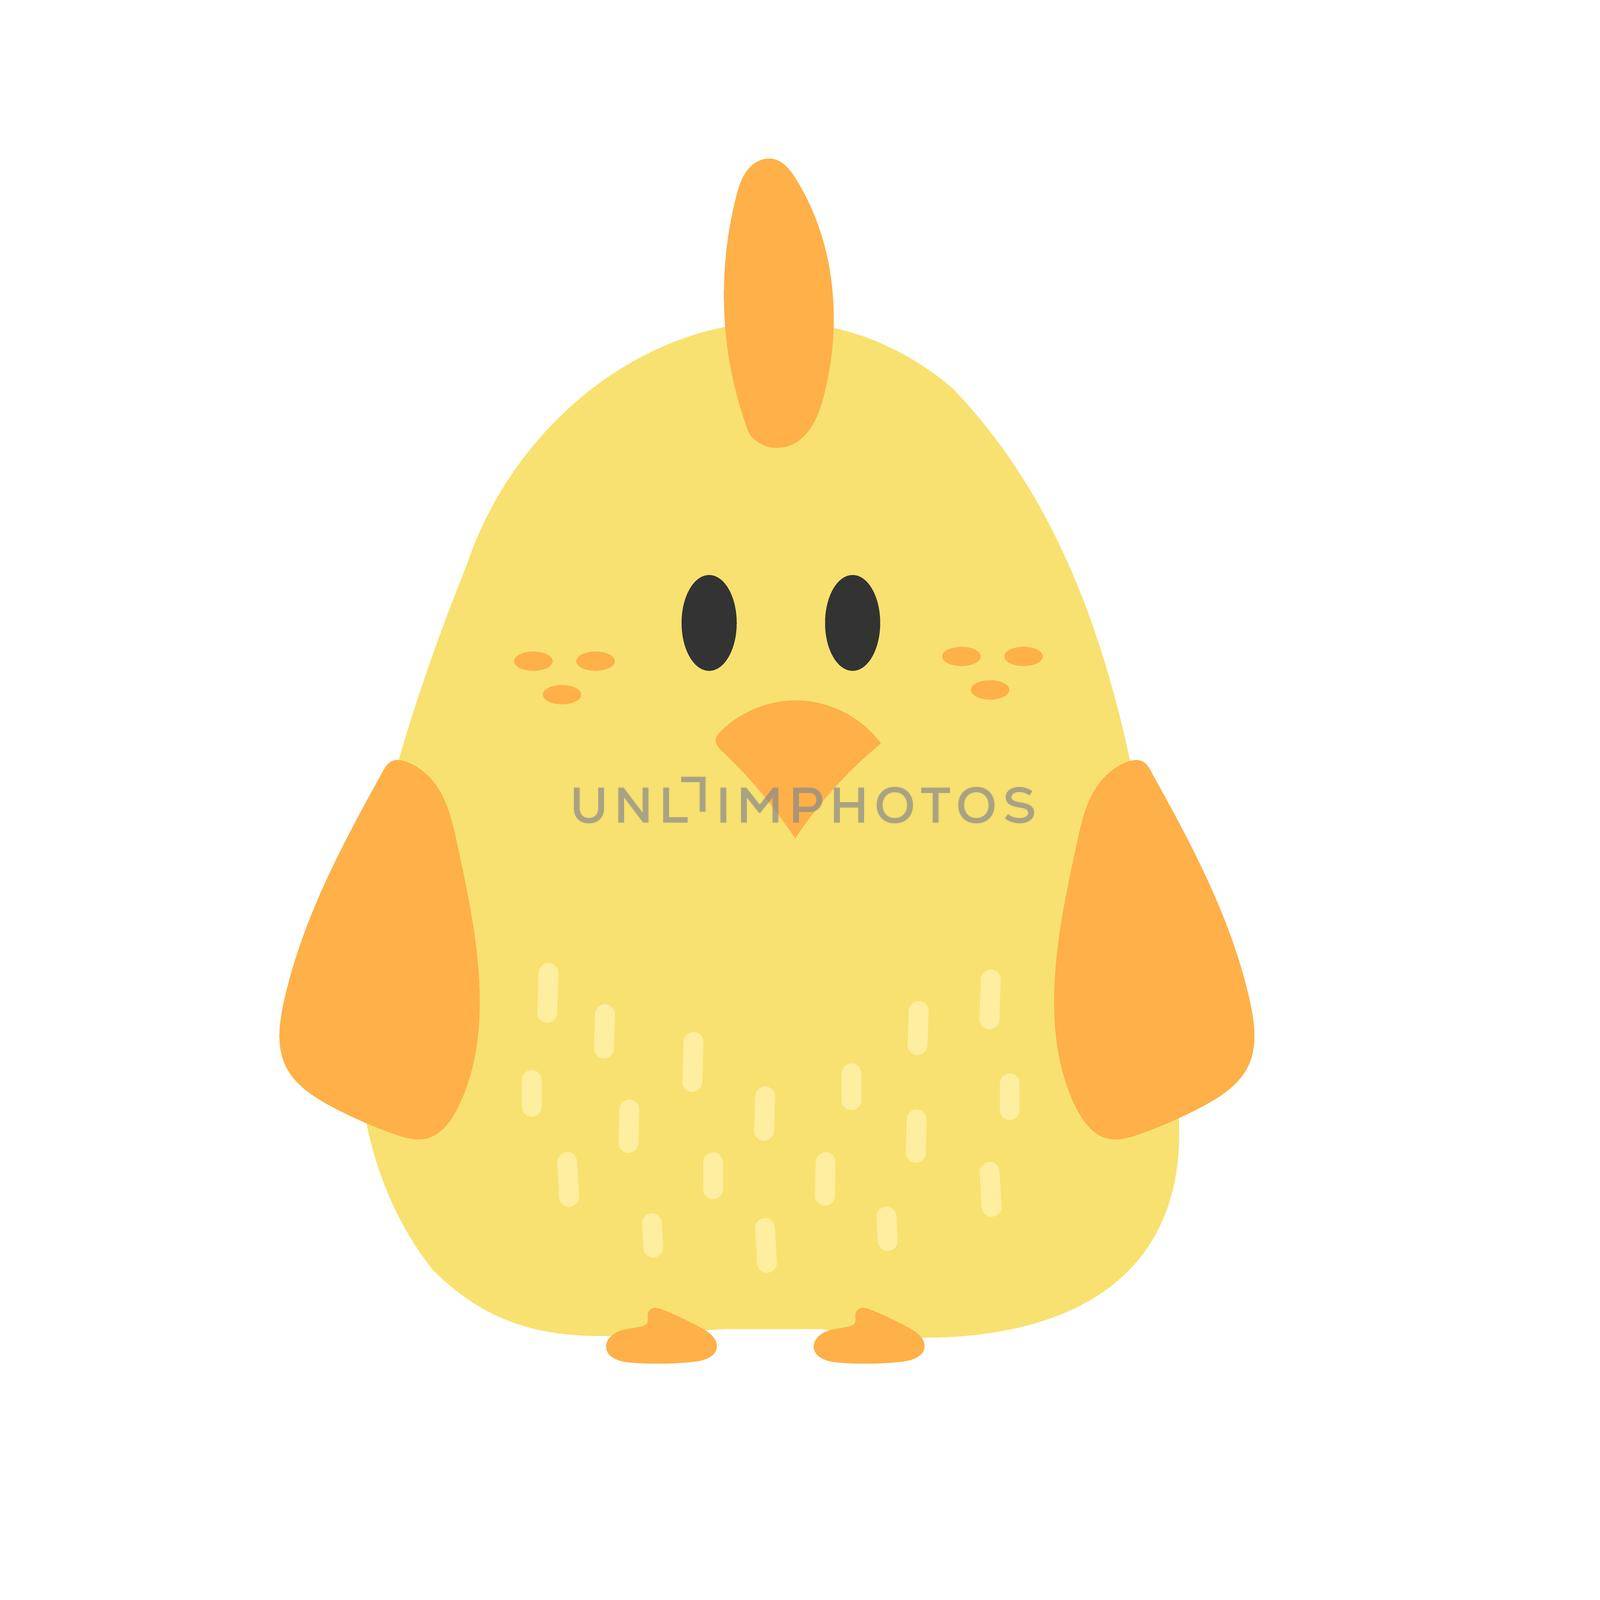 Cute cartoon chicken. Funny yellow chicken in hand drawn simple style, vector illustration.